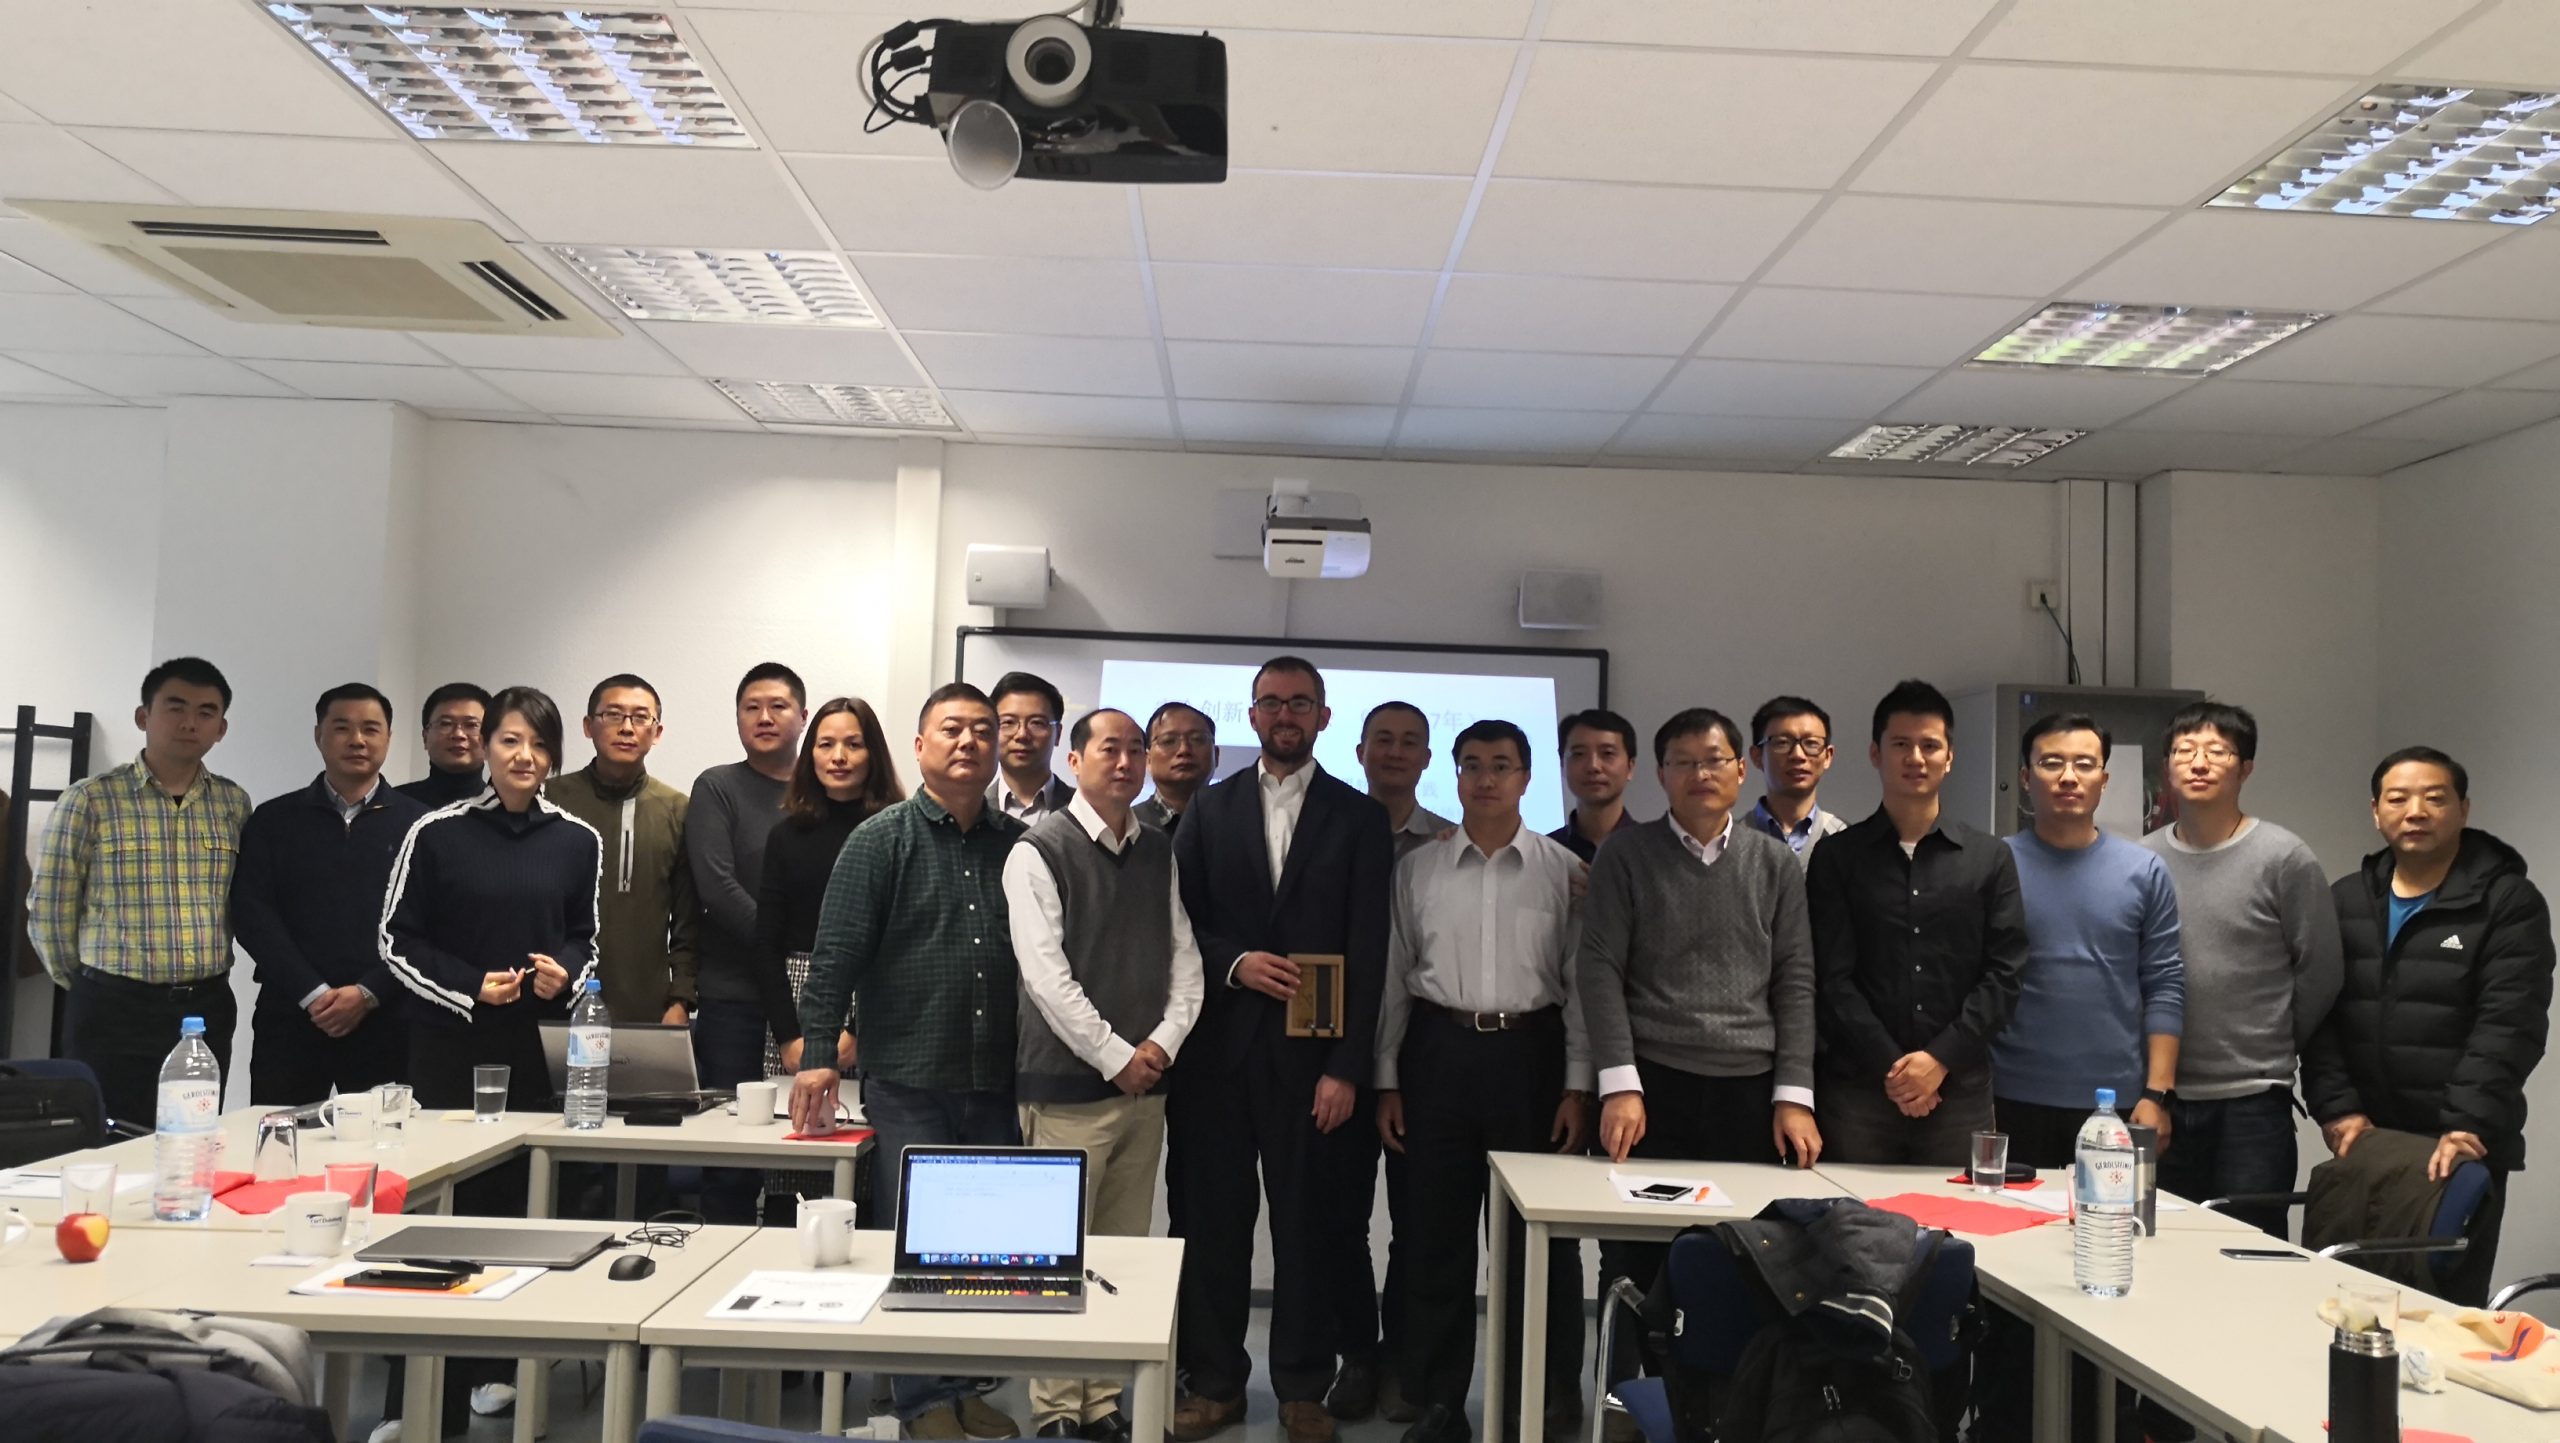 INSPIRE at the Shanghai Delegation in Cologne